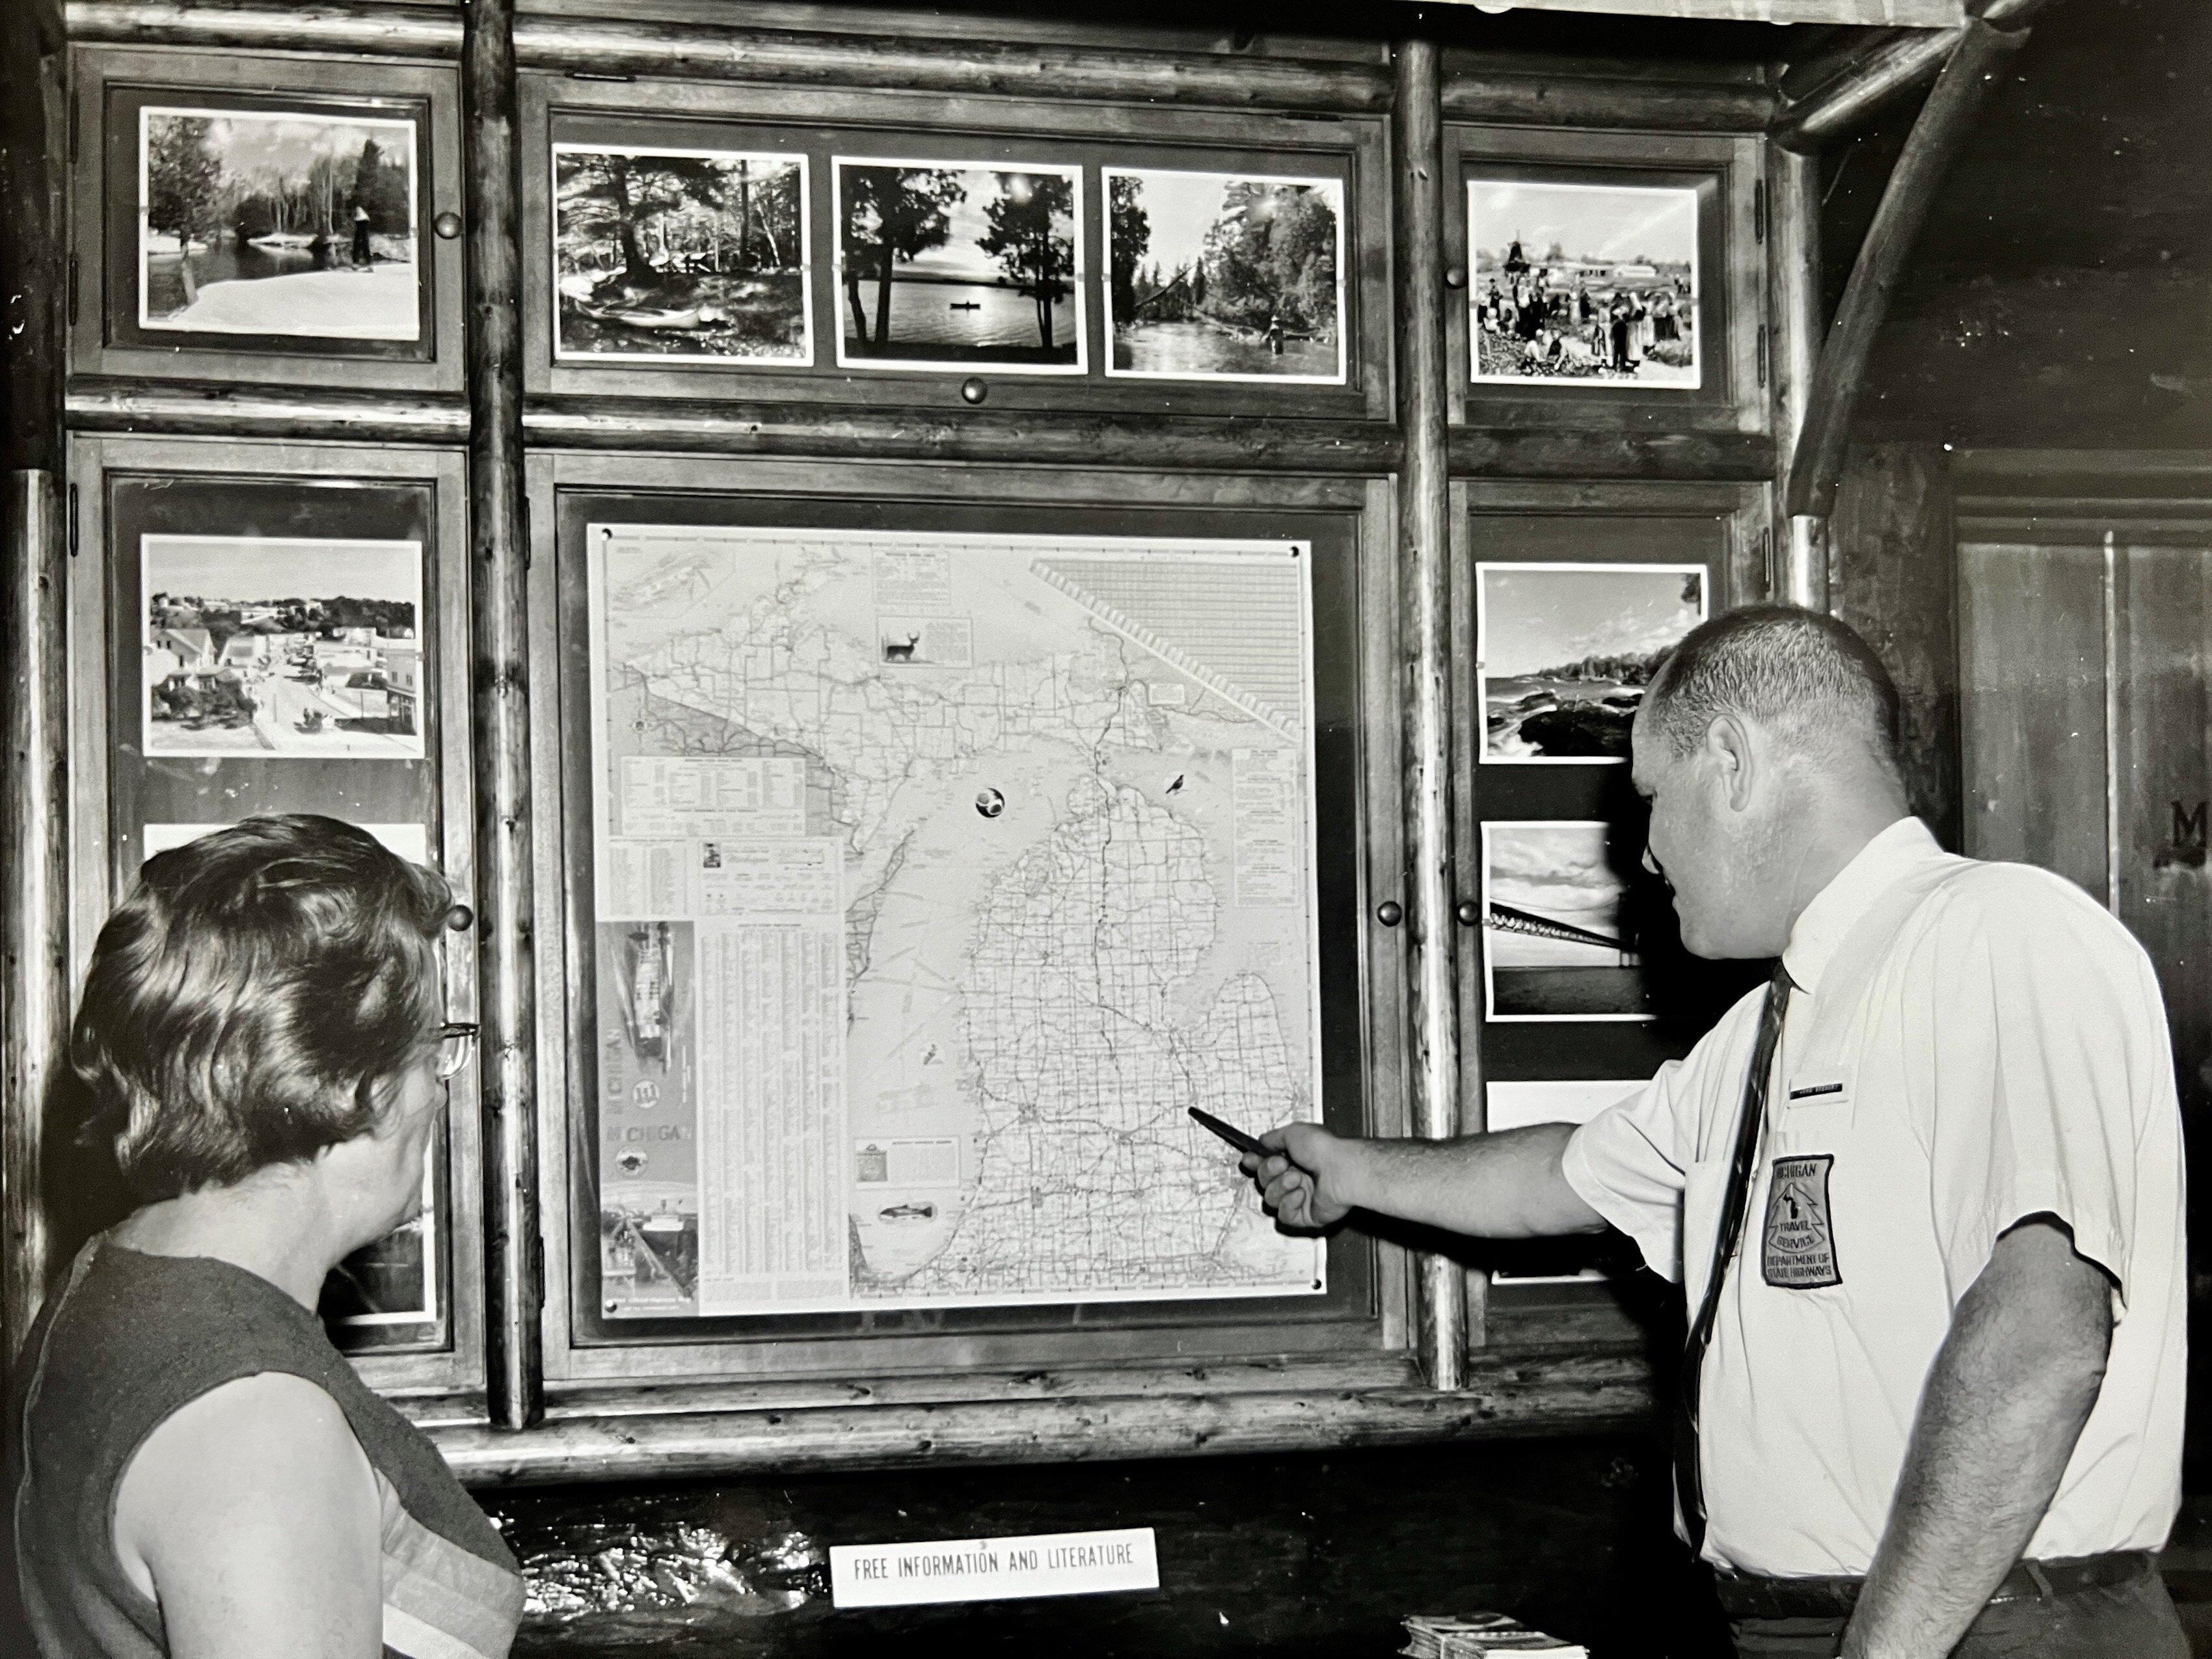 An old map of Michigan on display in the original welcome center building.